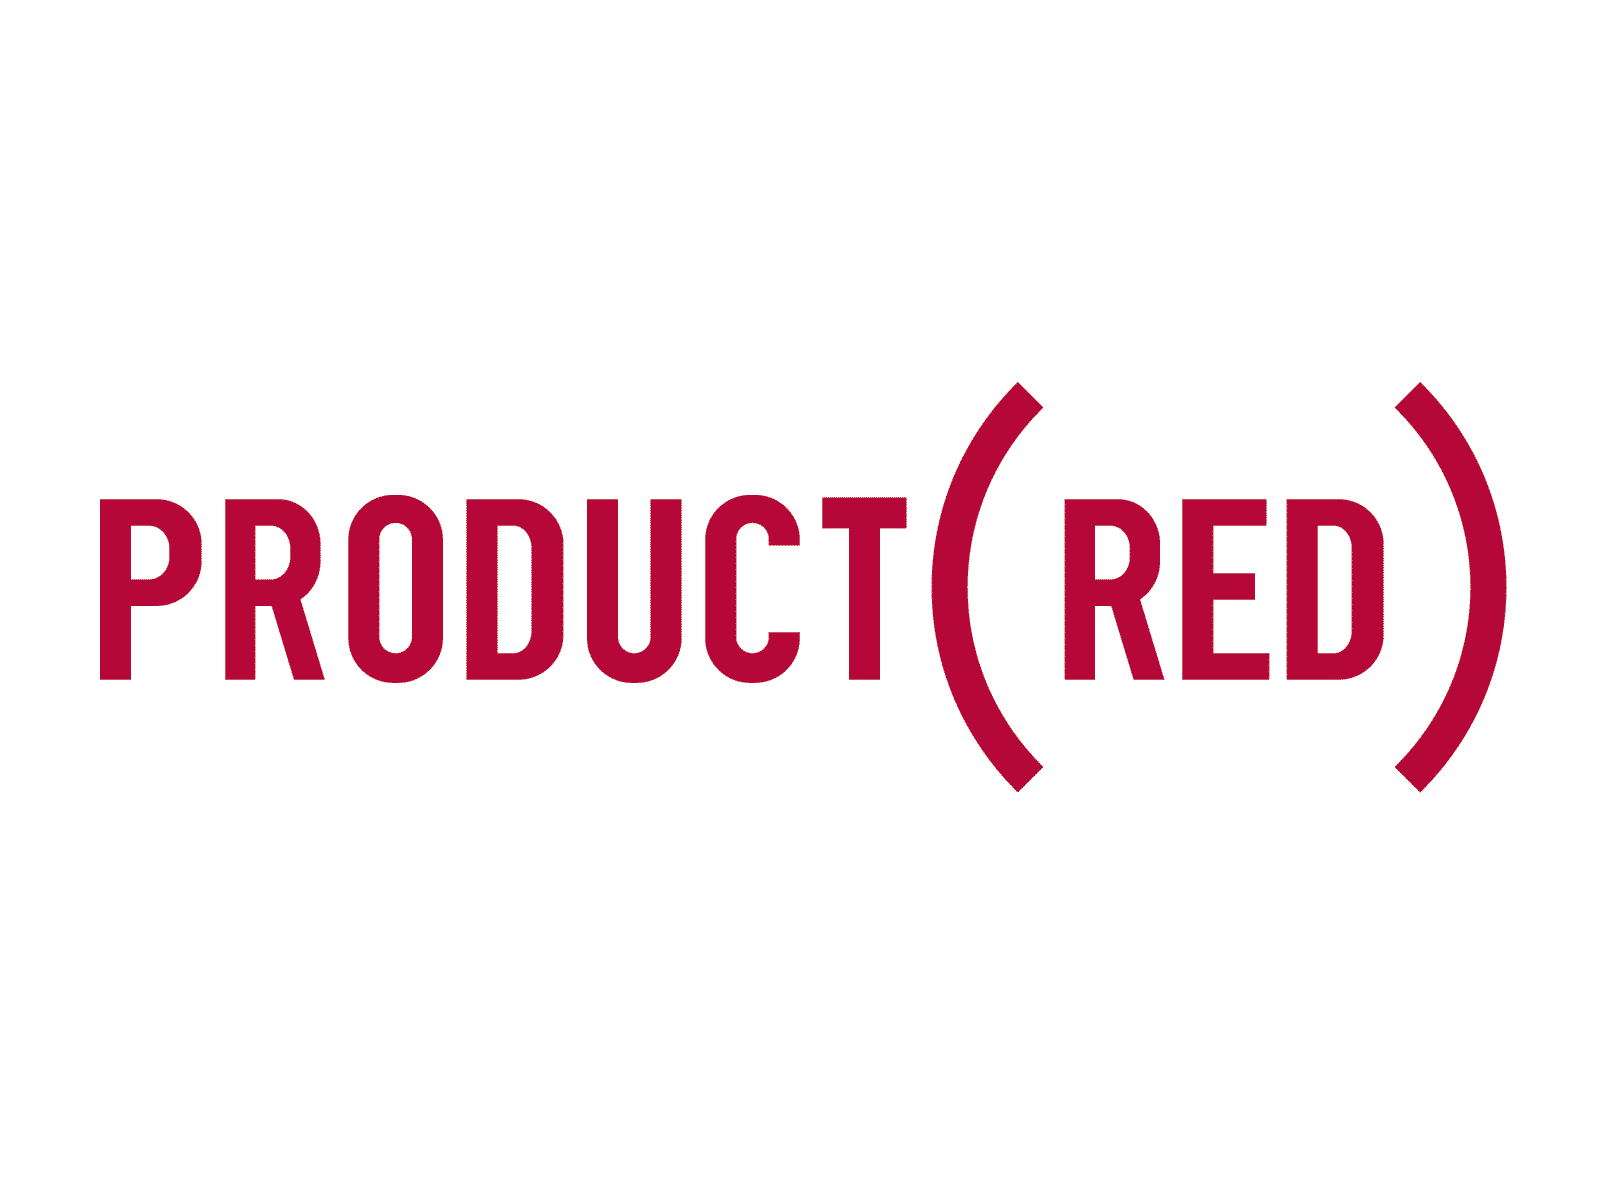 The 12 Best Product (RED) Things To Buy That Help Fight AIDS and Save Lives!